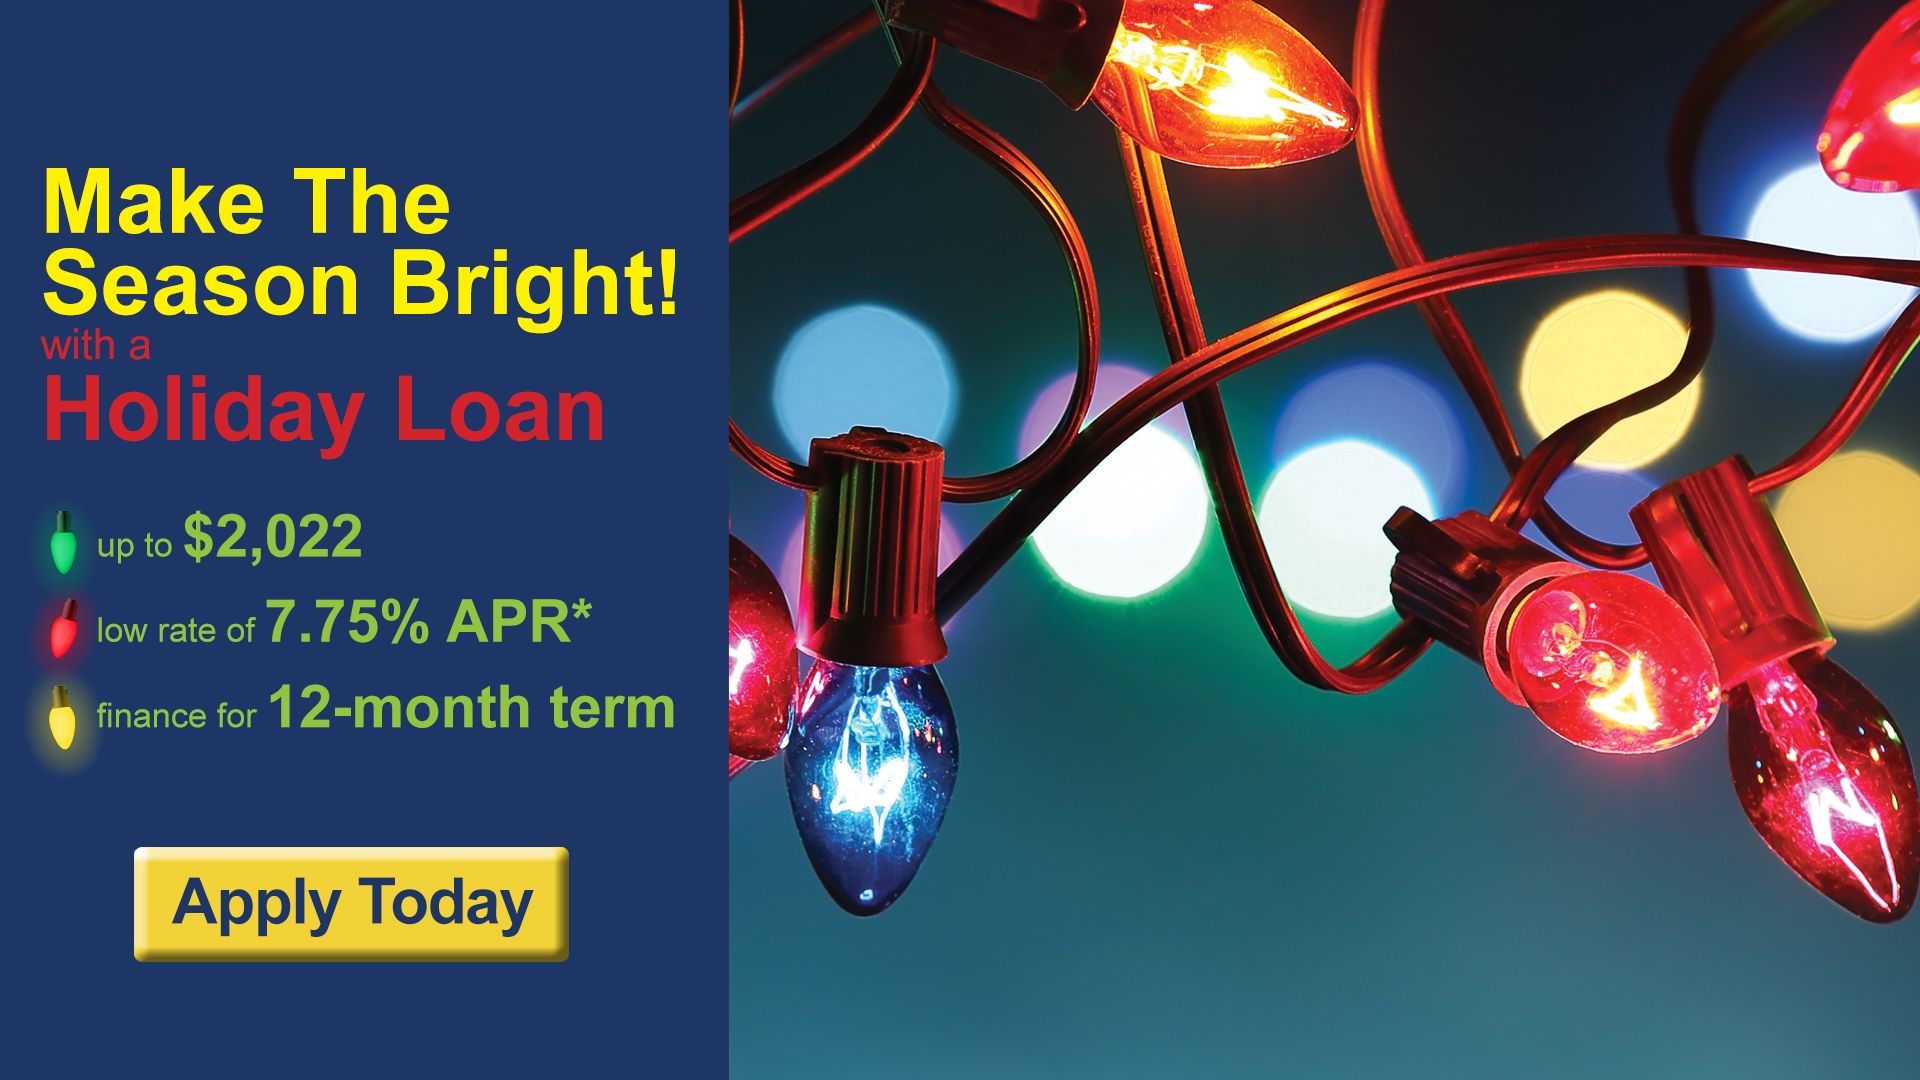 Make the season bright with a holiday loan. Up to $2,022. Low rate of 7.75 APR*. Finance for 12-month term.